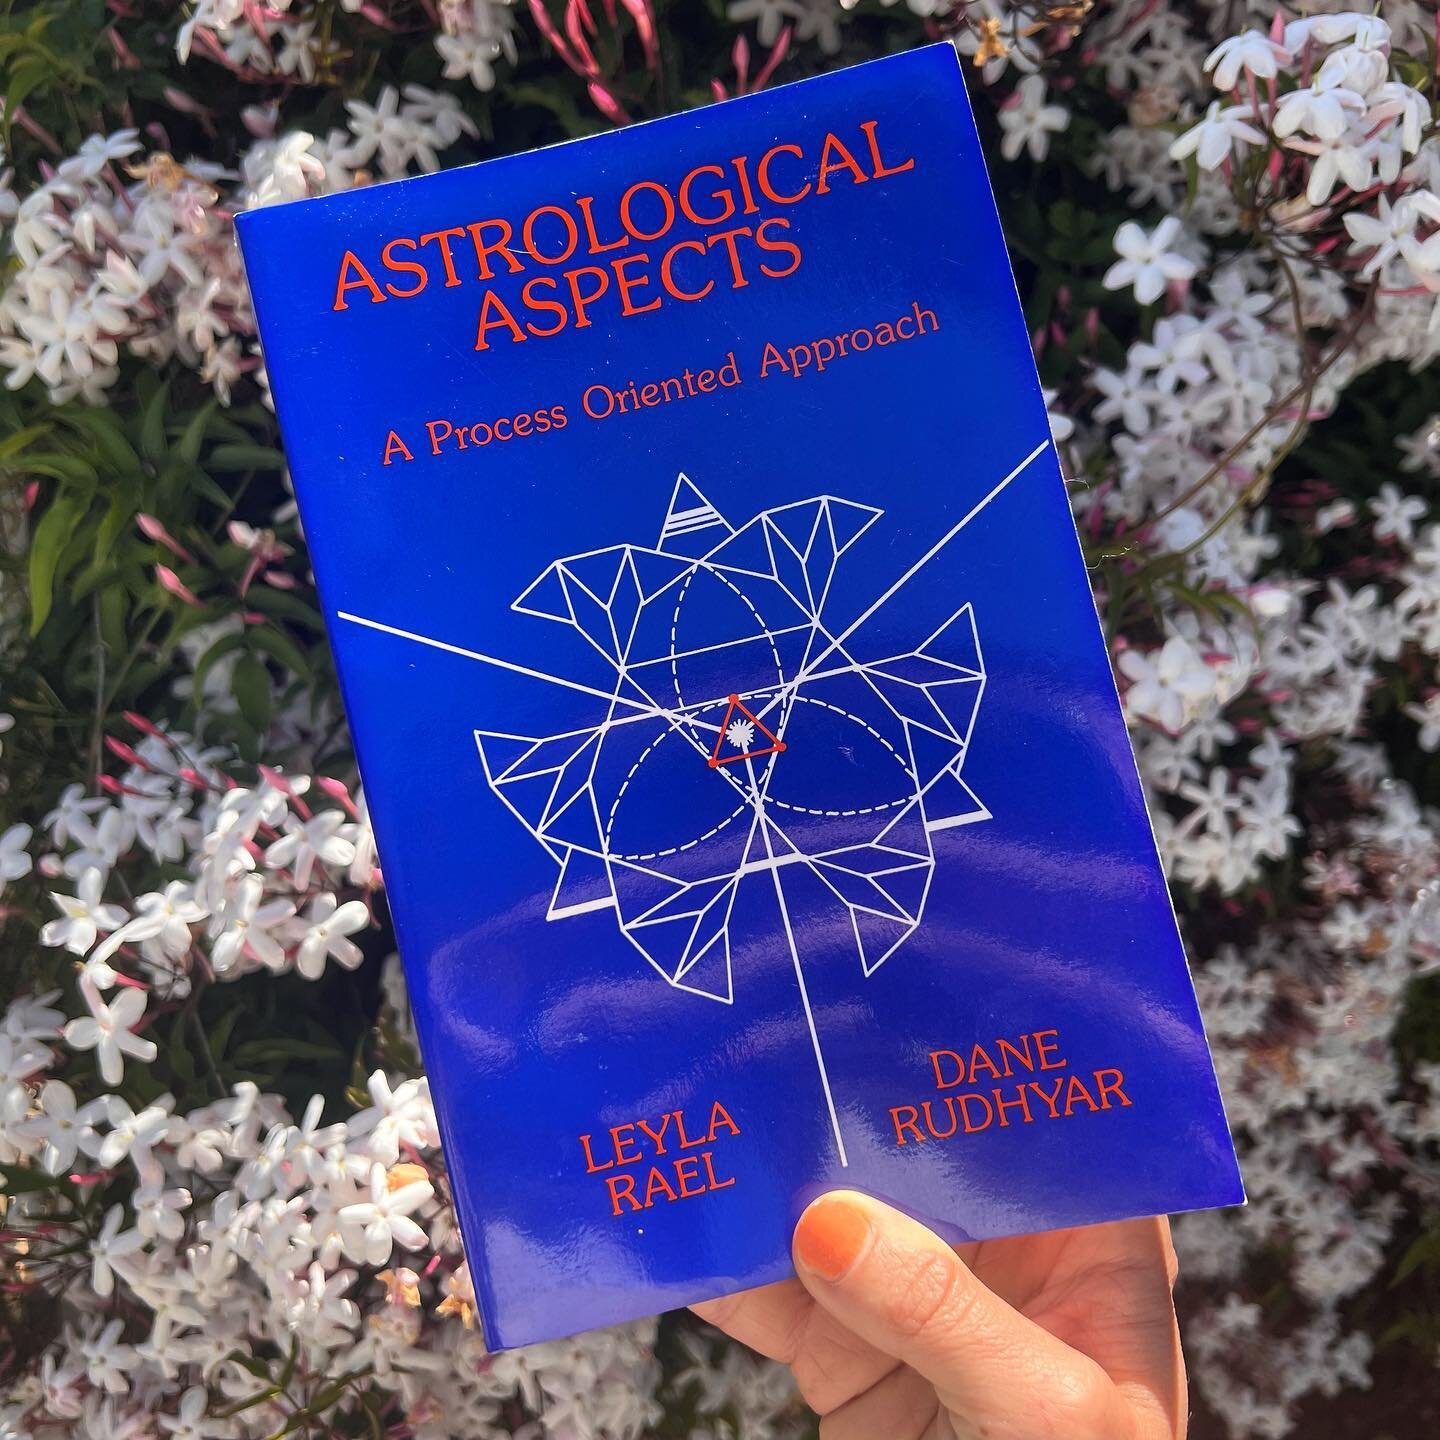 NEW BOOK AT OUR ASTROPRO STUDY GROUP!

Are you an Astrologer? Are you interested in Soul Centered Astrology &amp; Dane Rudhyar&rsquo;s work?

We have an Esoteric Astrology Consultation Group that meets 2x month to discuss books and consult Astrologic